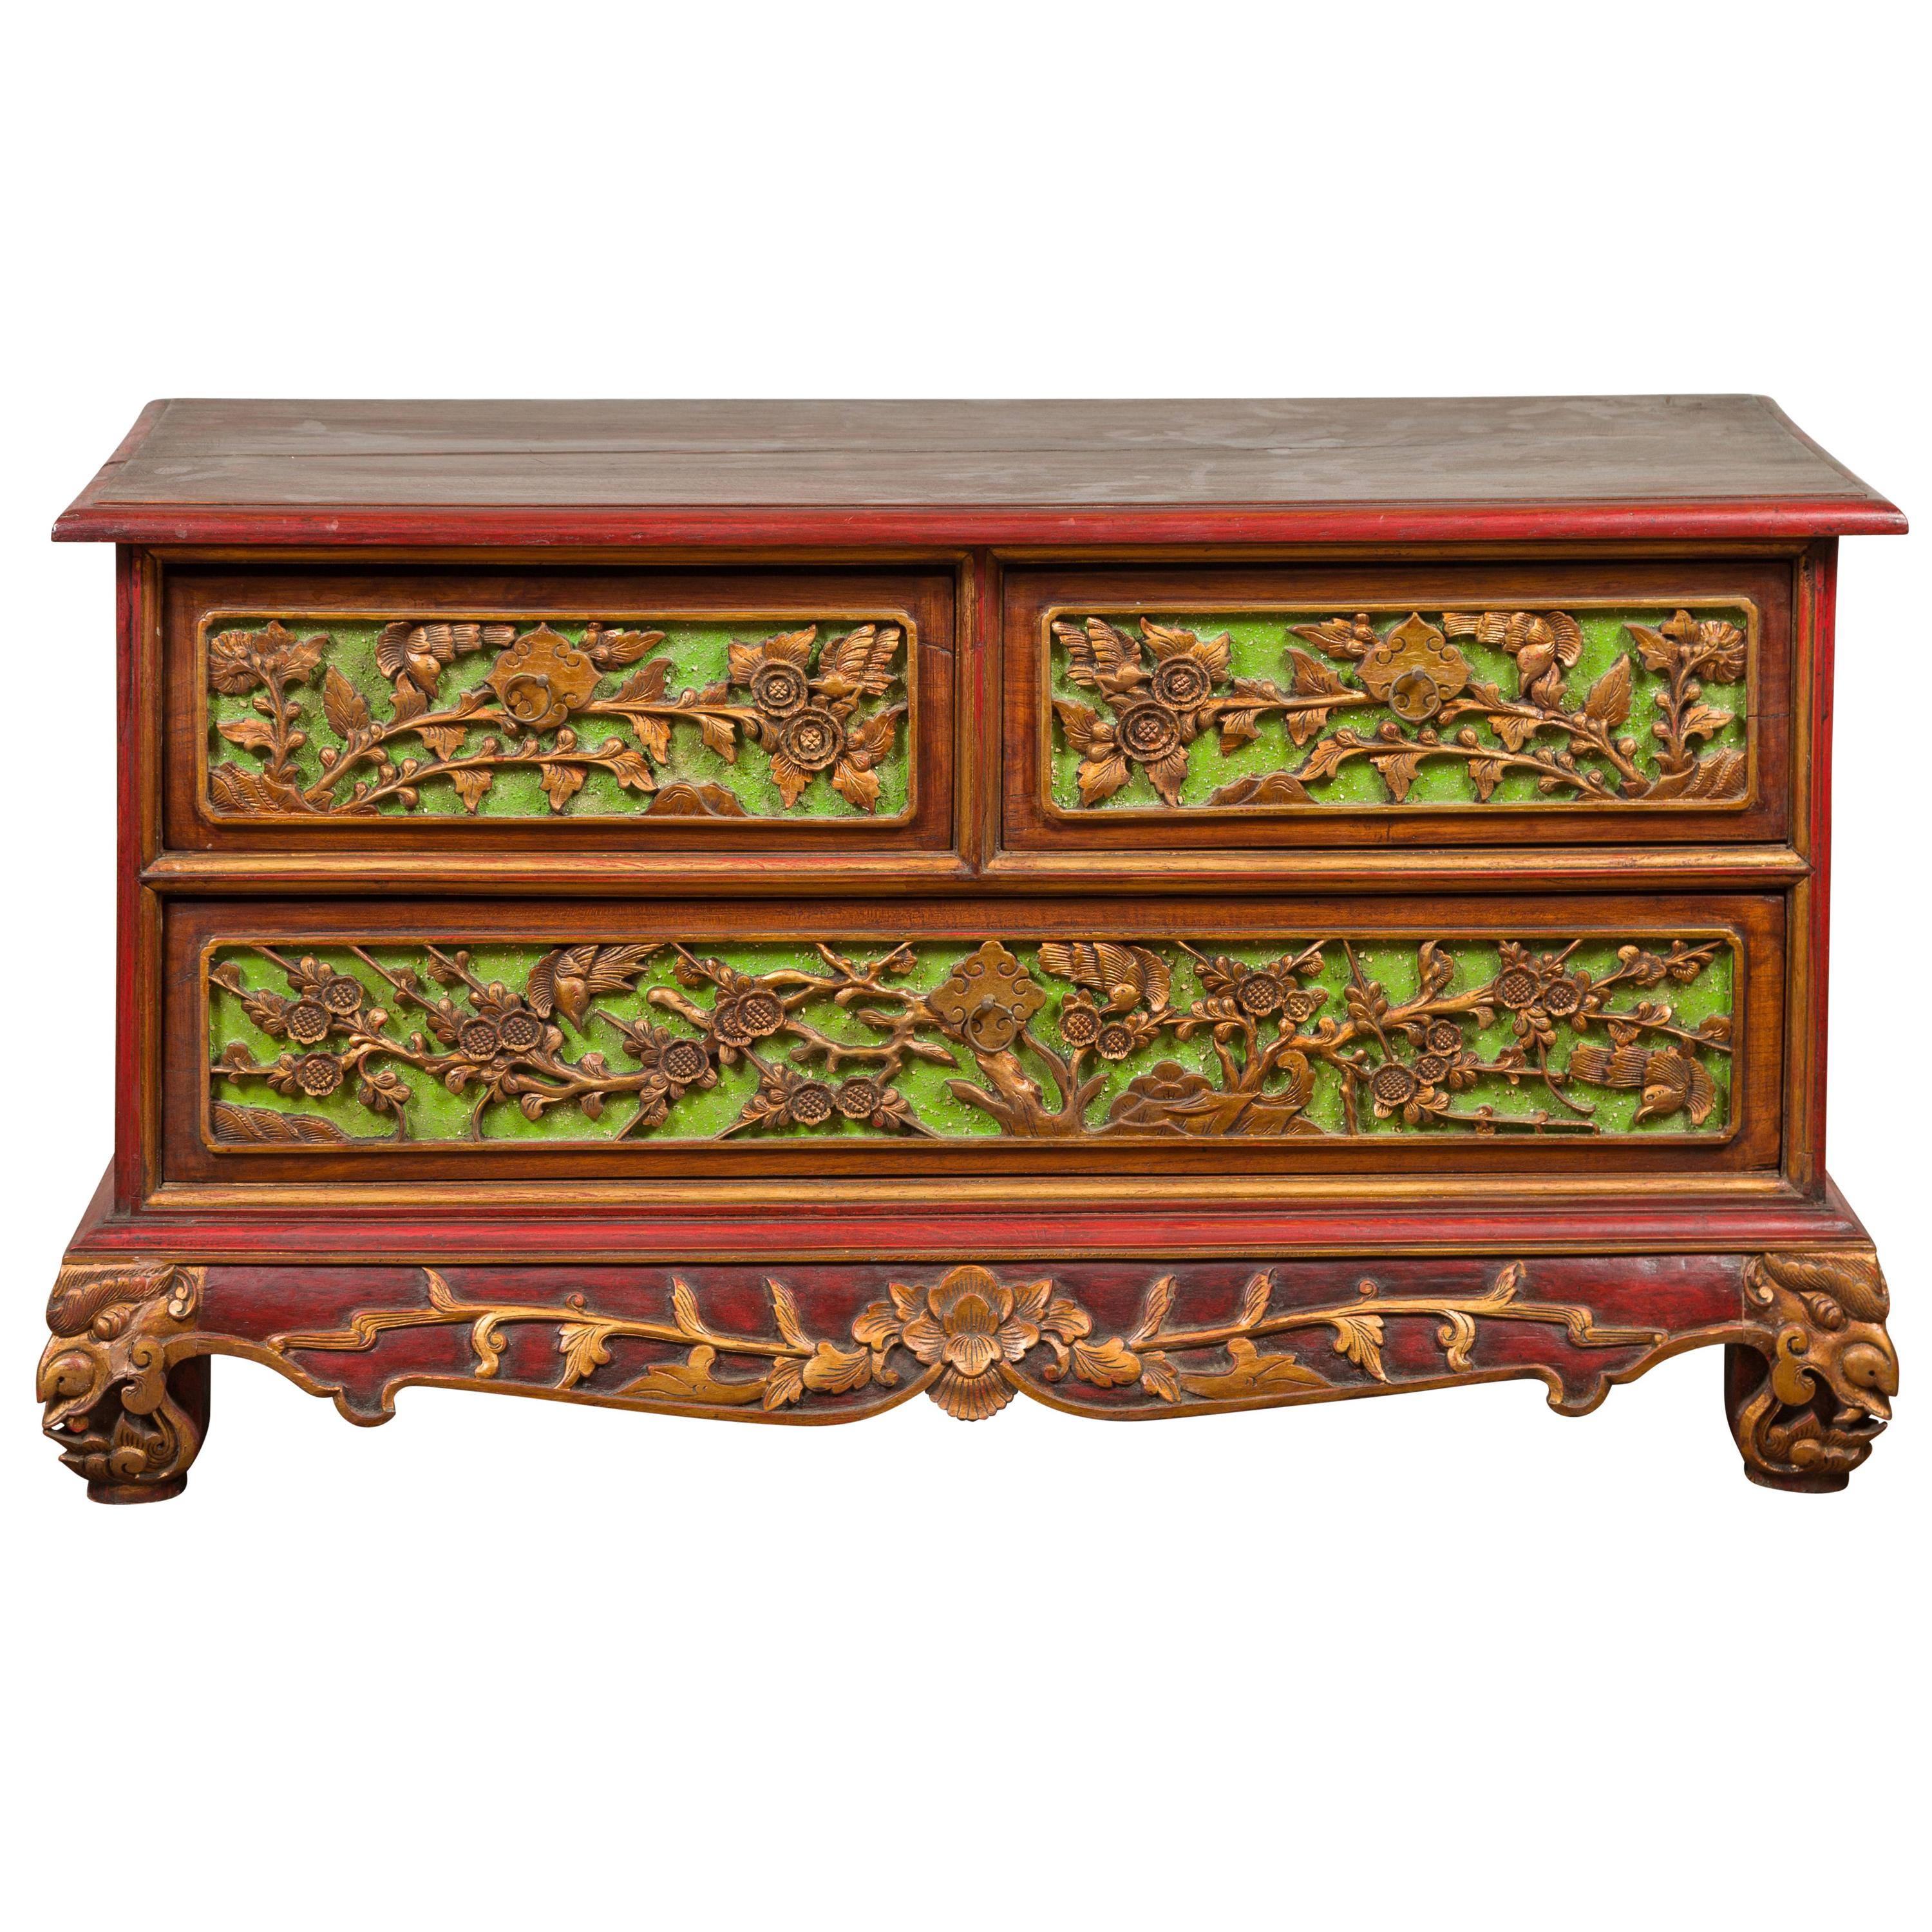 19th Century Polychrome Three-Drawer Chest from Madura with Carved Floral Motifs